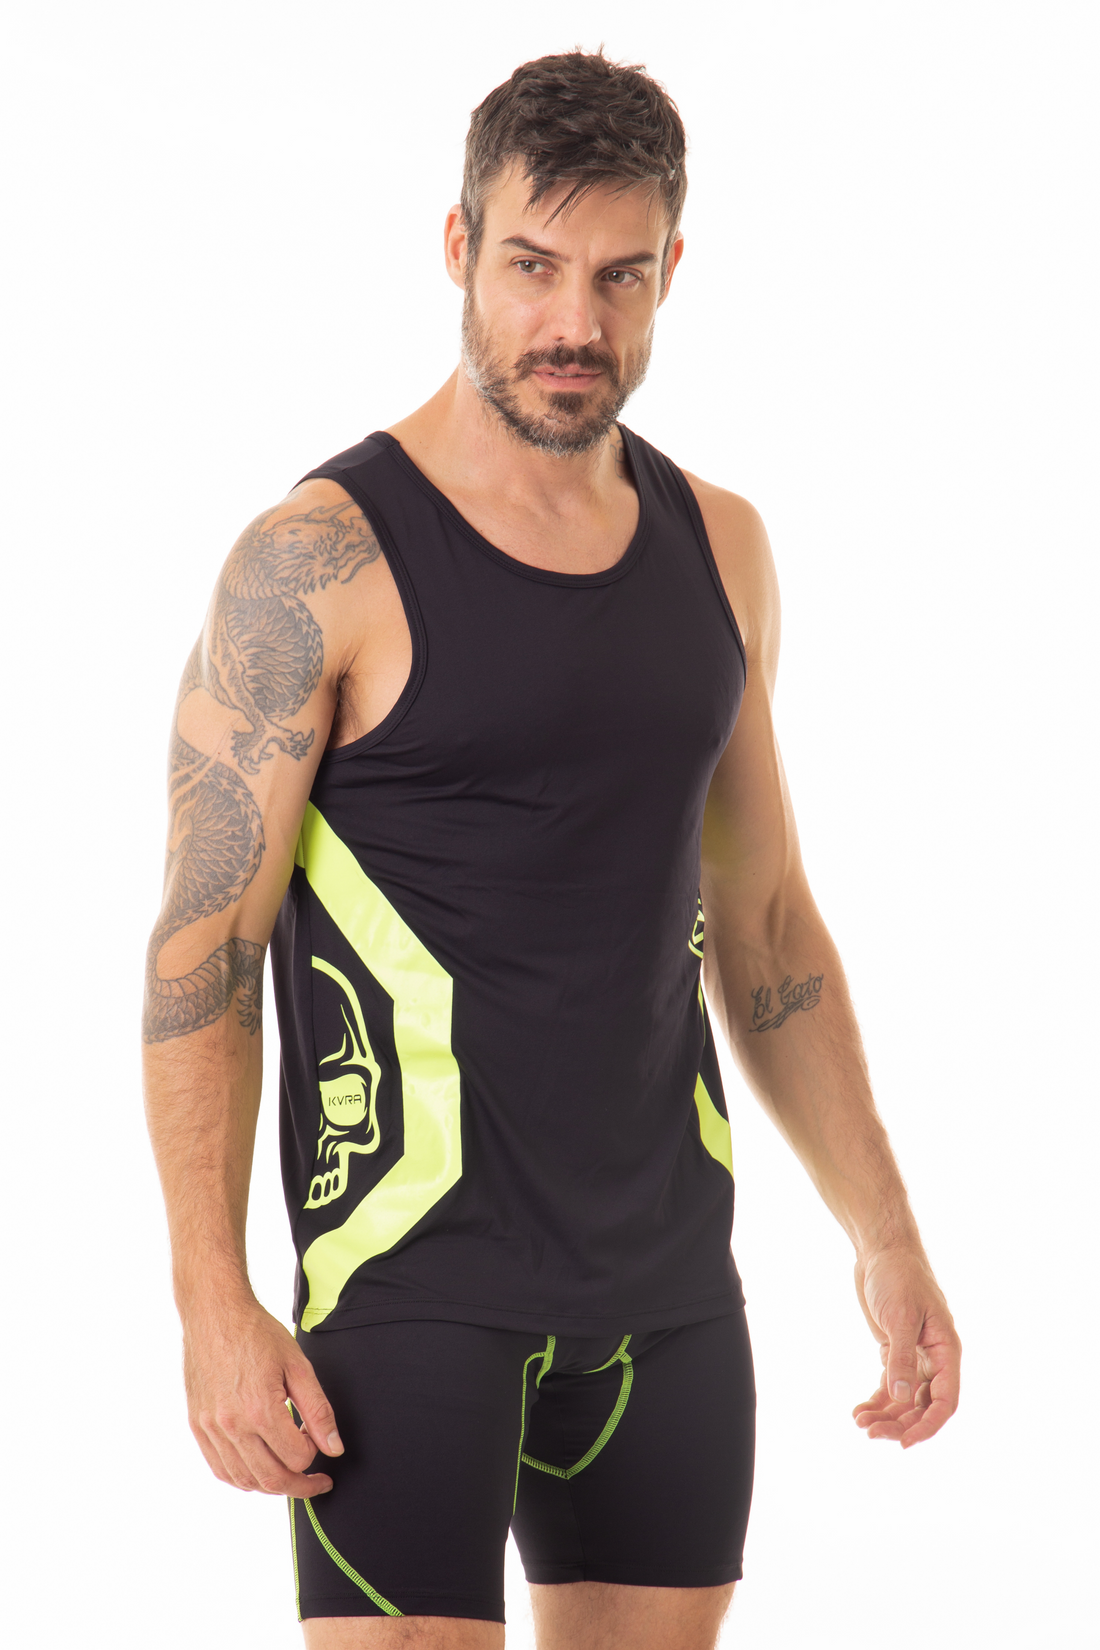 FUNCTION- Performance Tank Top